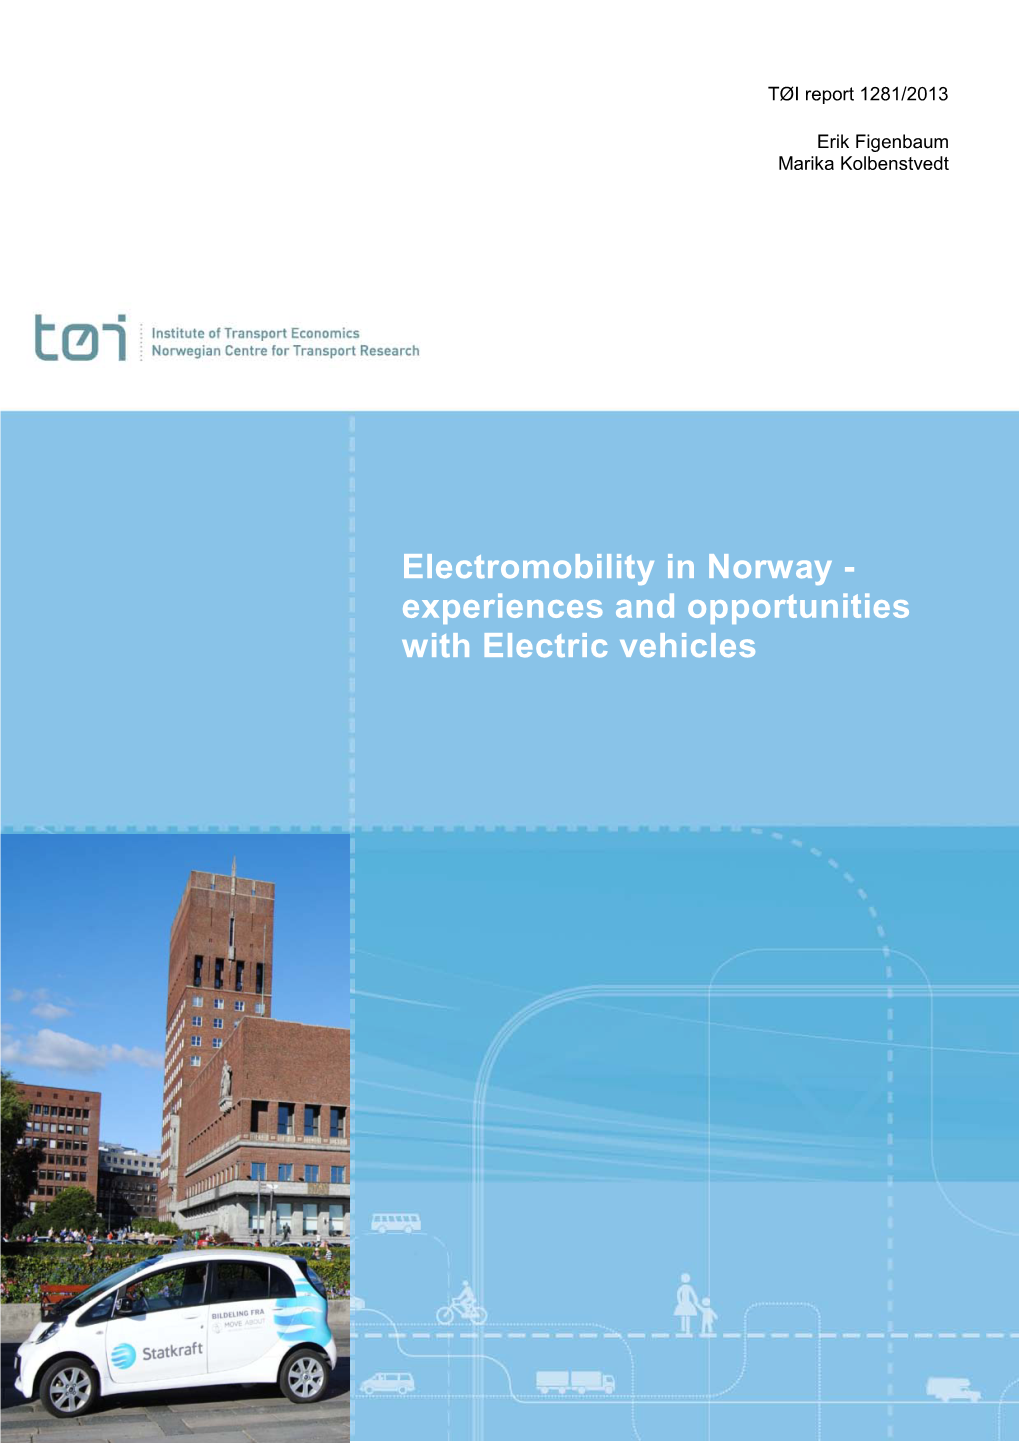 Electromobility in Norway - Experiences and Opportunities with Electric Vehicles